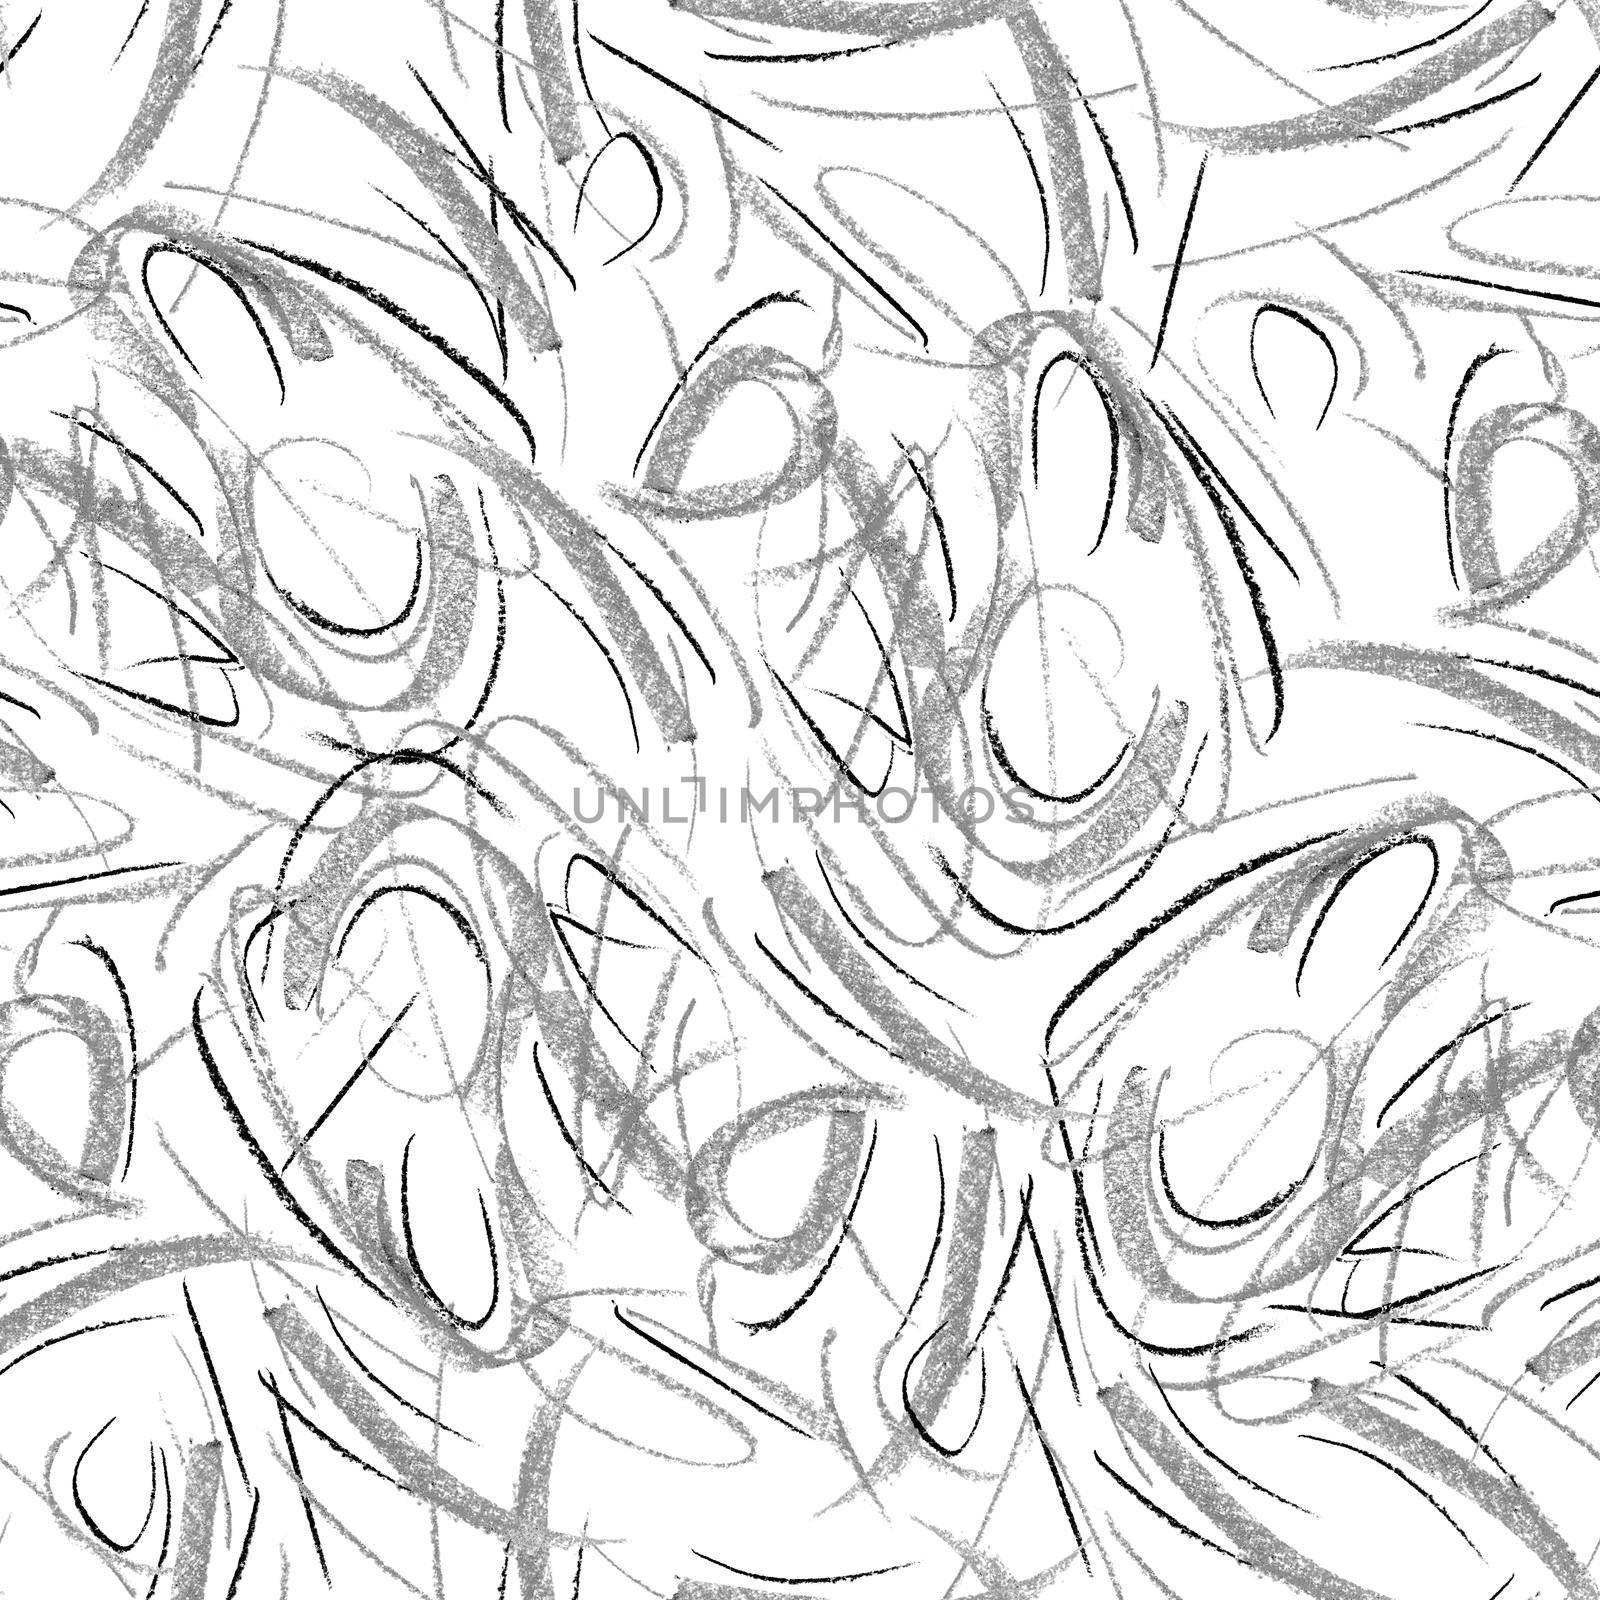 Wavy and swirled chalk strokes seamless pattern. Monochrome paint freehand scribbles, lines, squiggle pattern. Abstract wallpaper design, textile print